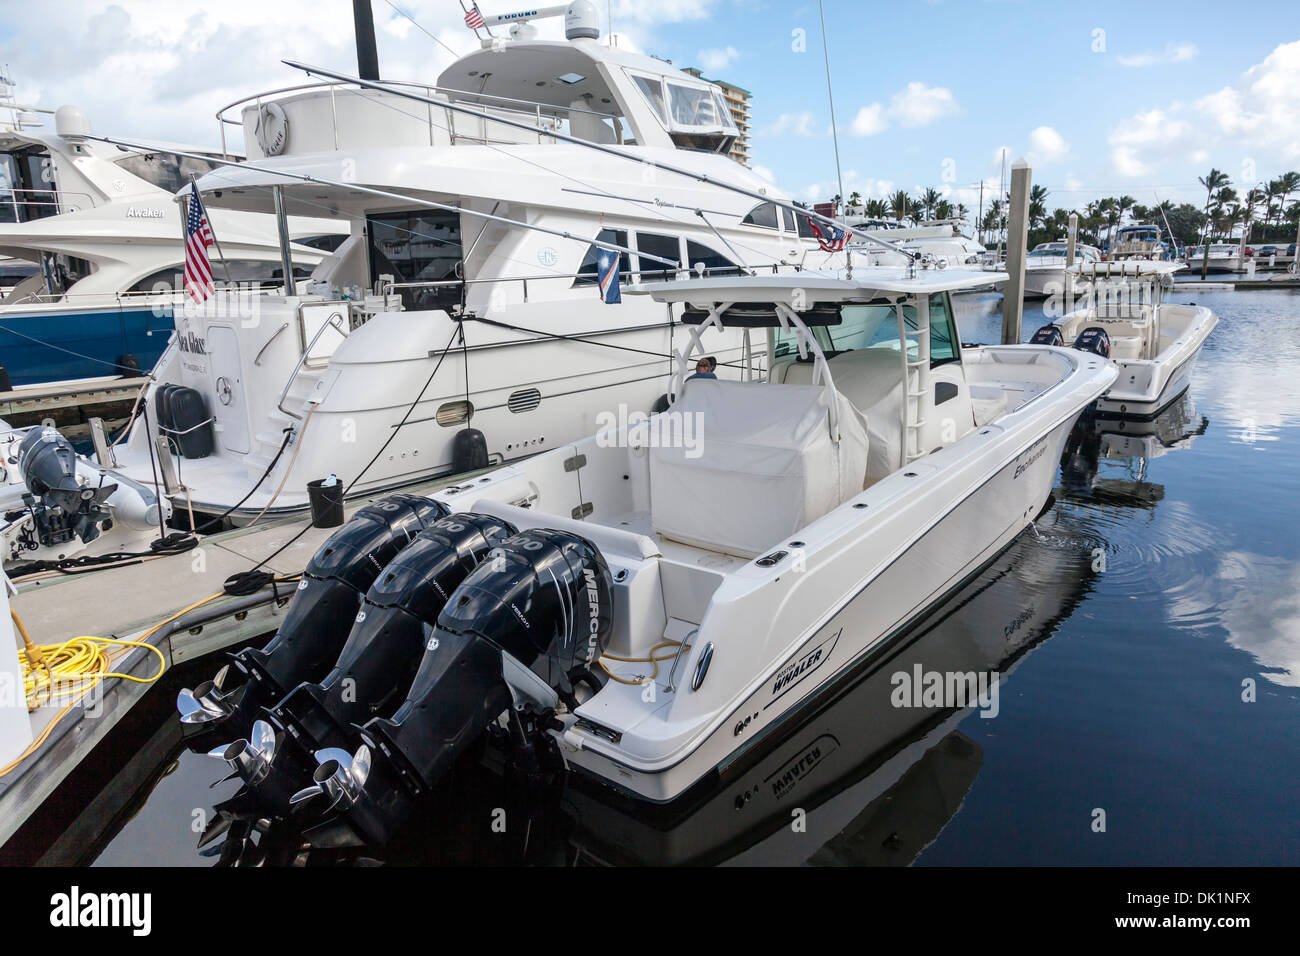 Boston Whaler with three Mercury outboard engines and yachts docked at Bahia Mar in Fort Lauderdale, Florida. USA Stock Photo